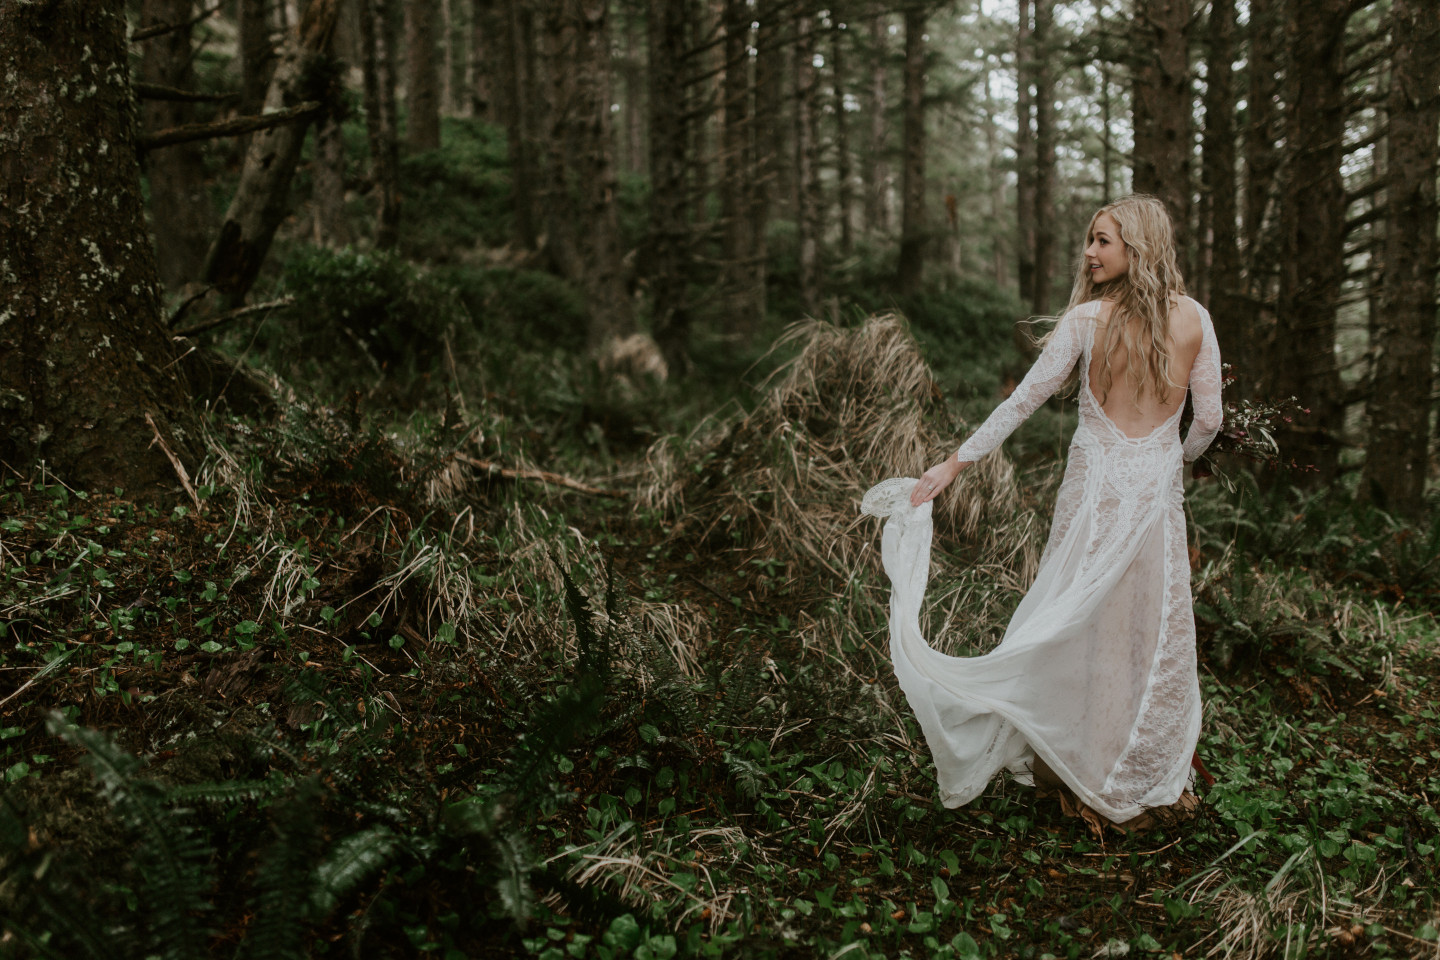 Hannah moves her dress as she walks through the woods in Cannon Beach, Oregon during her Oregon coast elopement. Wedding photography in Portland Oregon by Sienna Plus Josh.